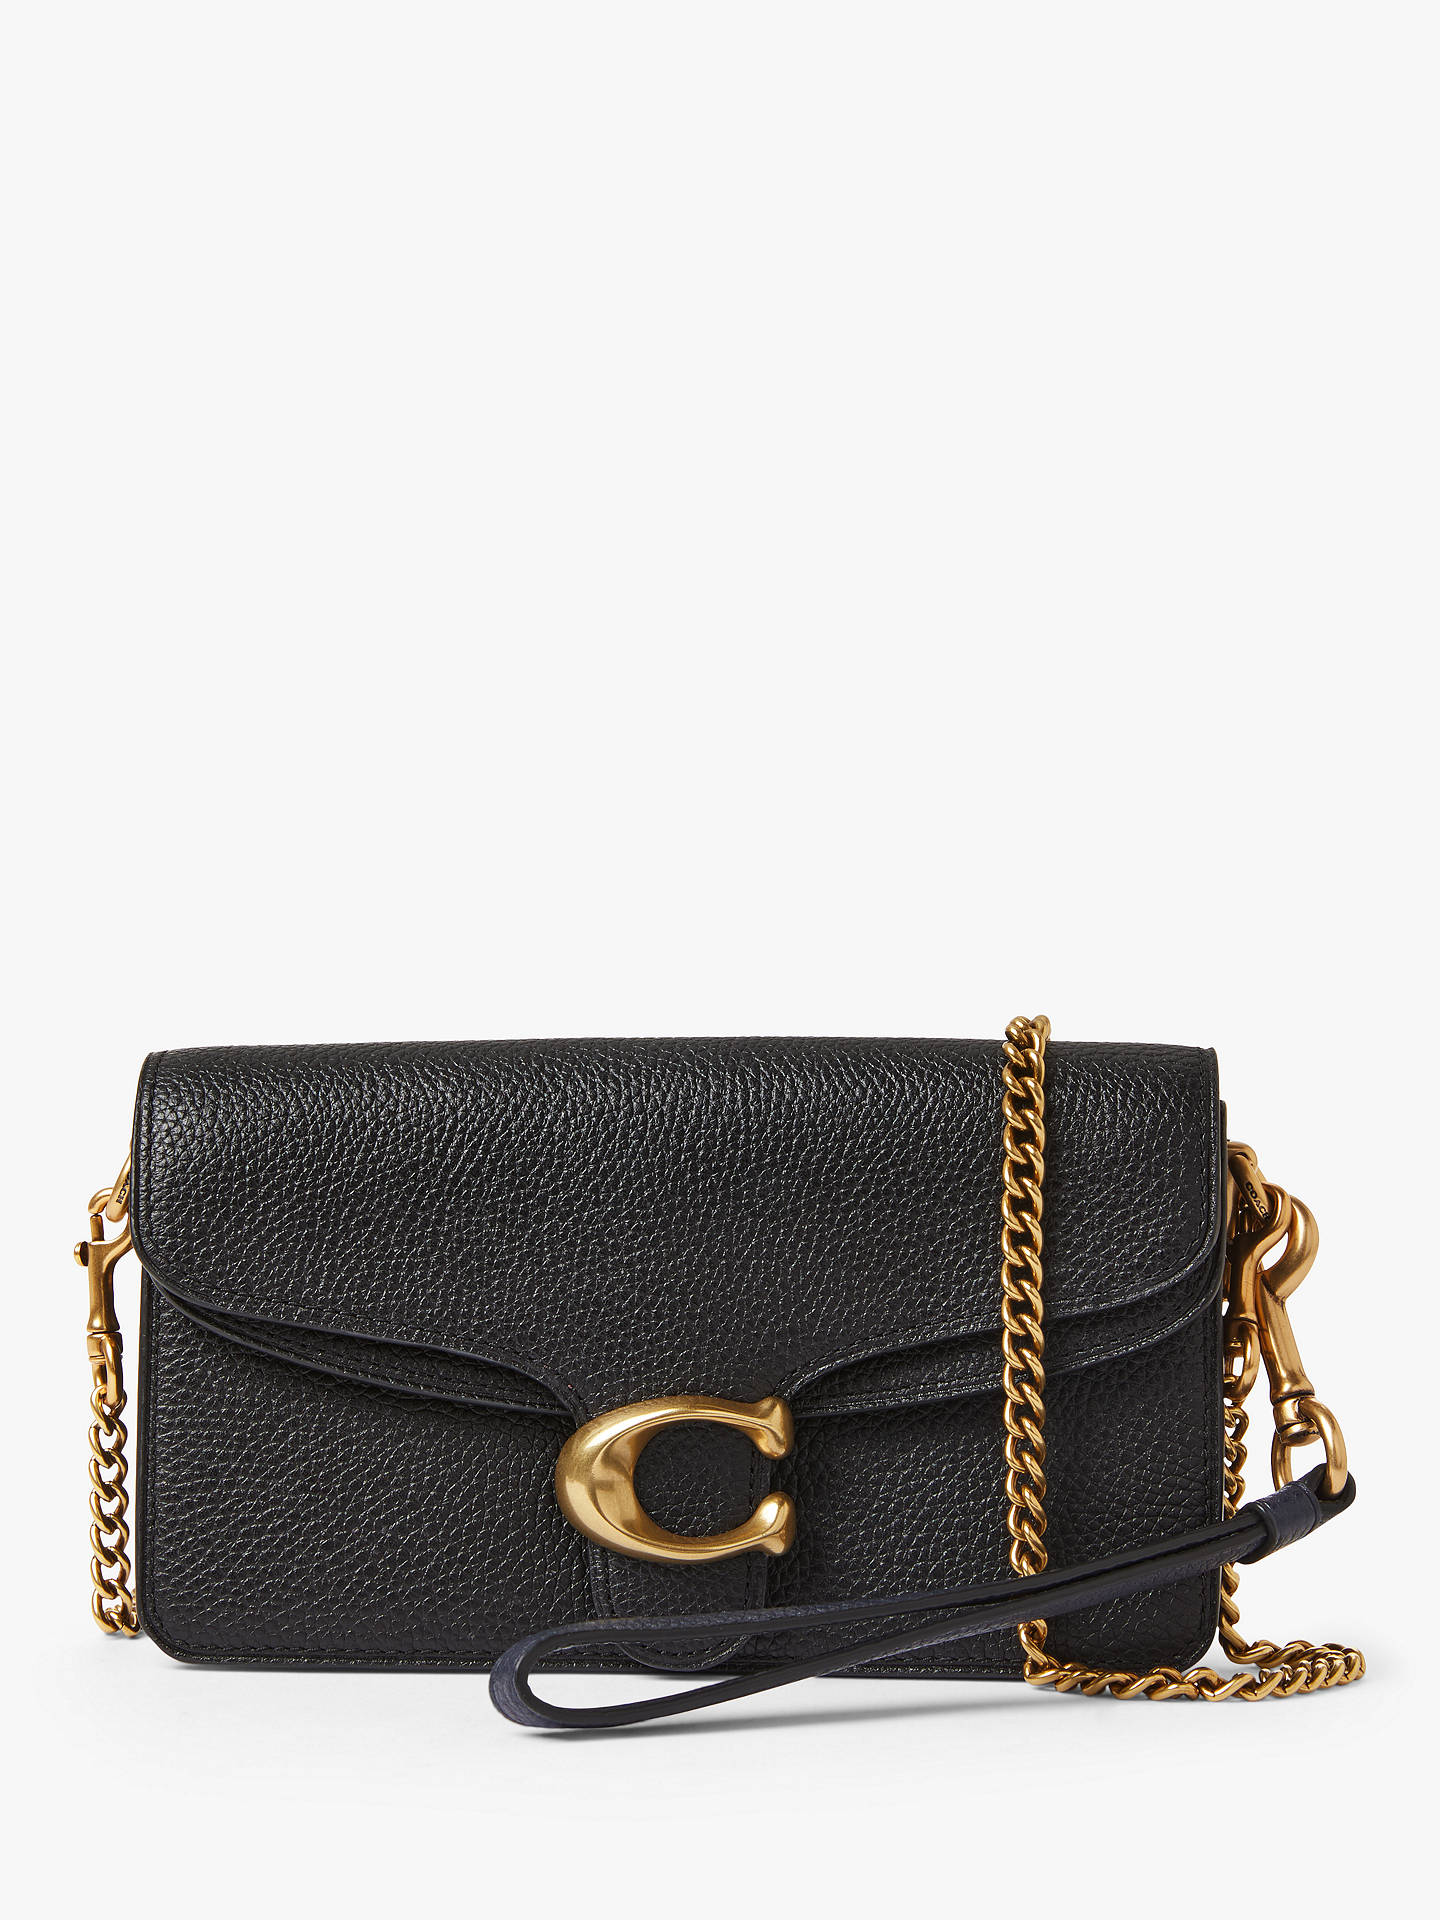 Coach Tabby Leather Cross Body Bag at John Lewis & Partners